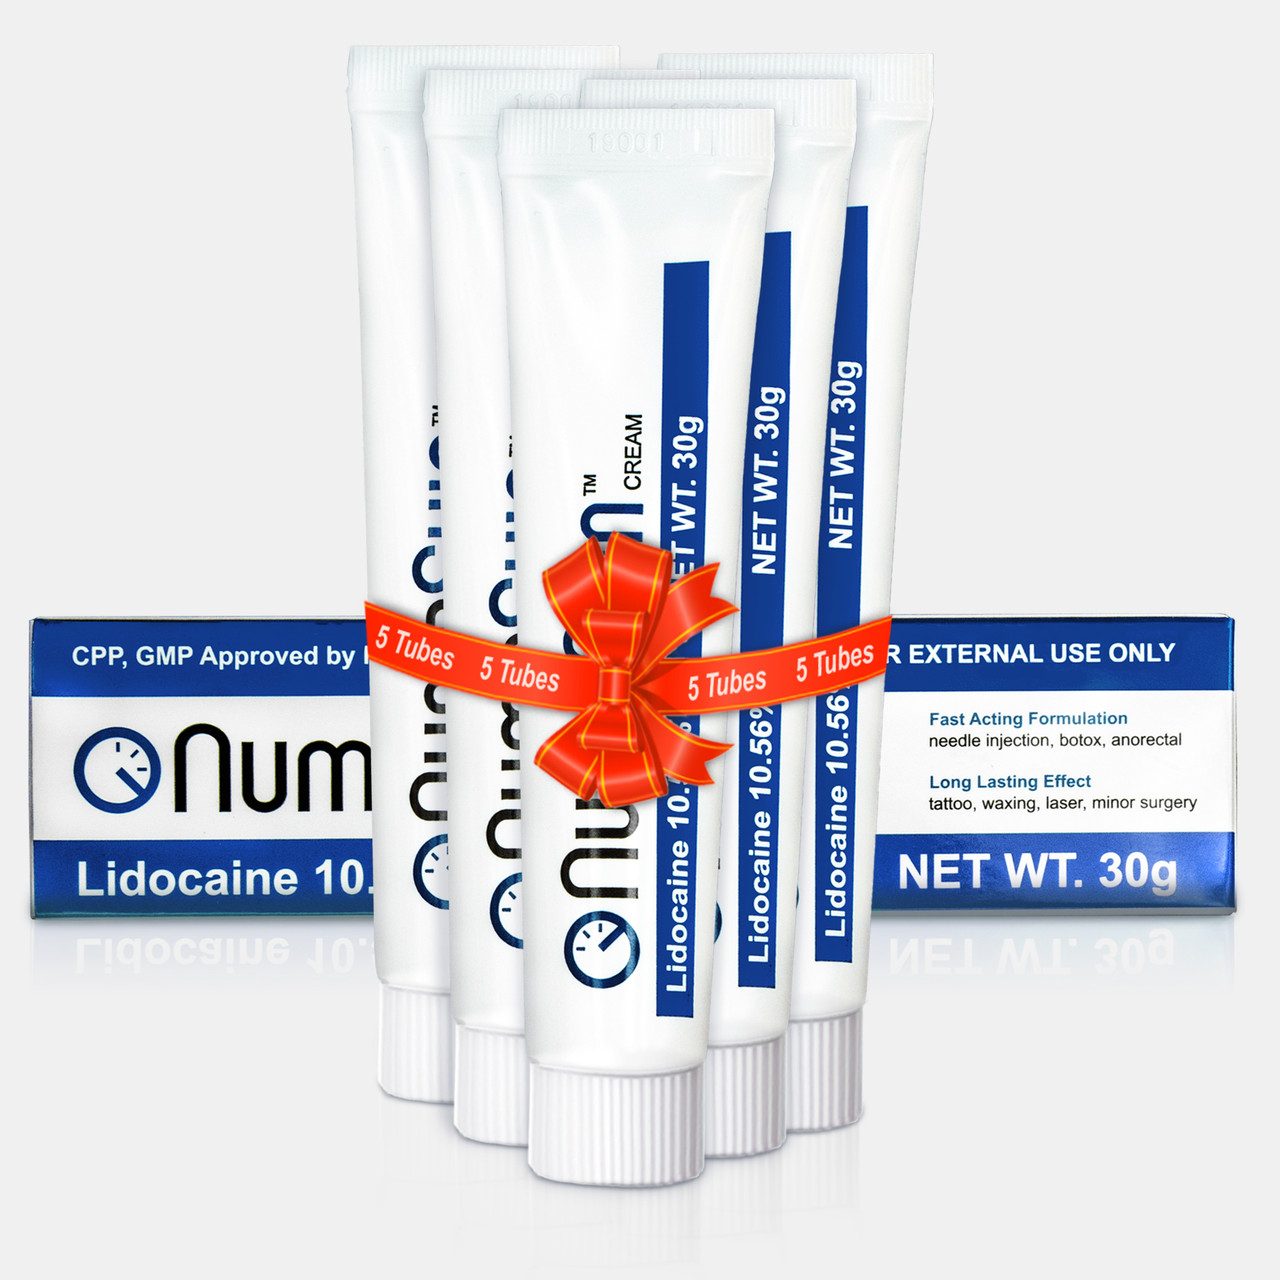 How to use numbskin cream?